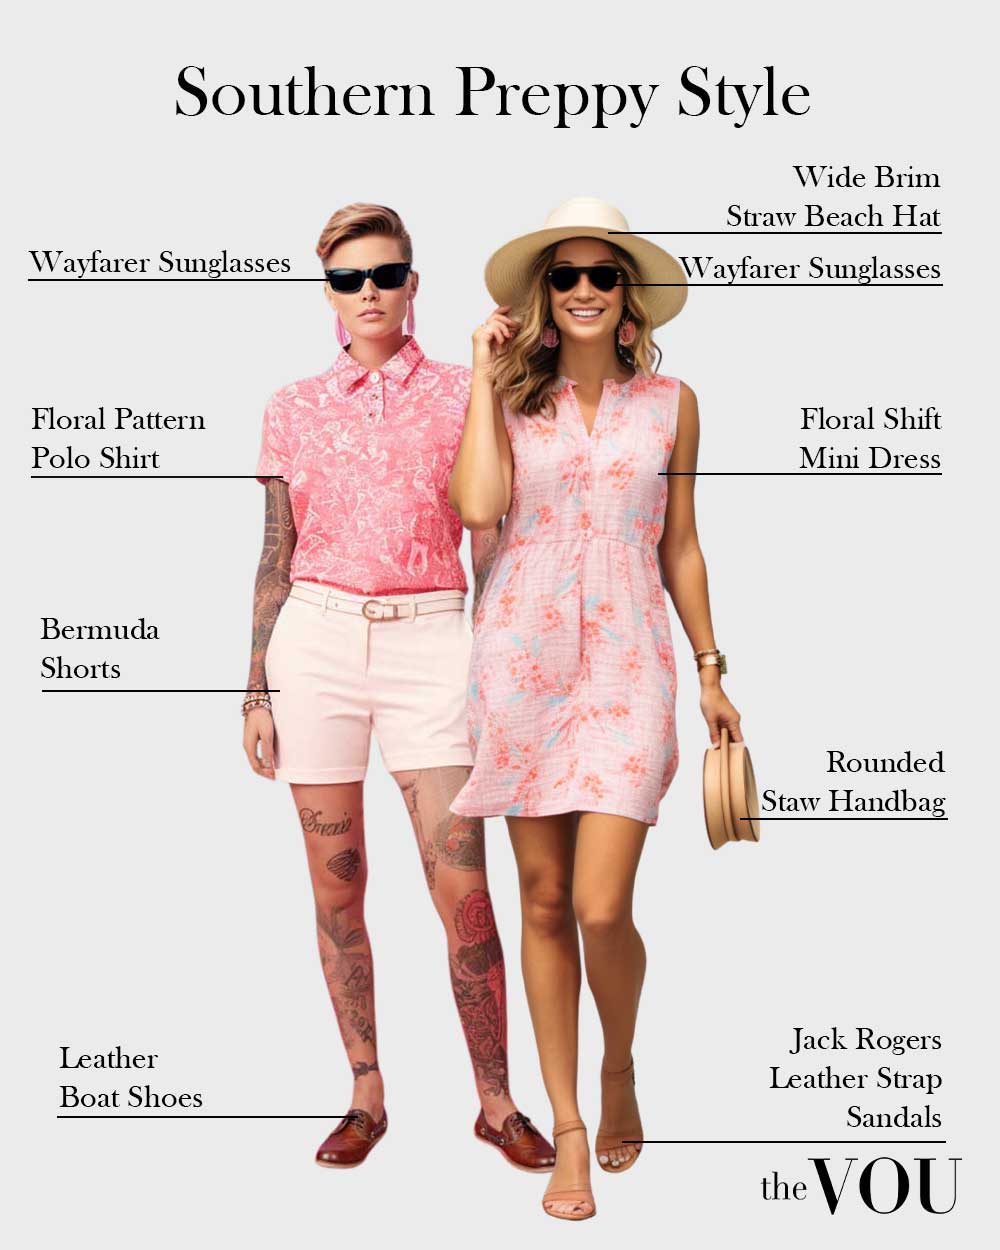 Southern Preppy Style explained